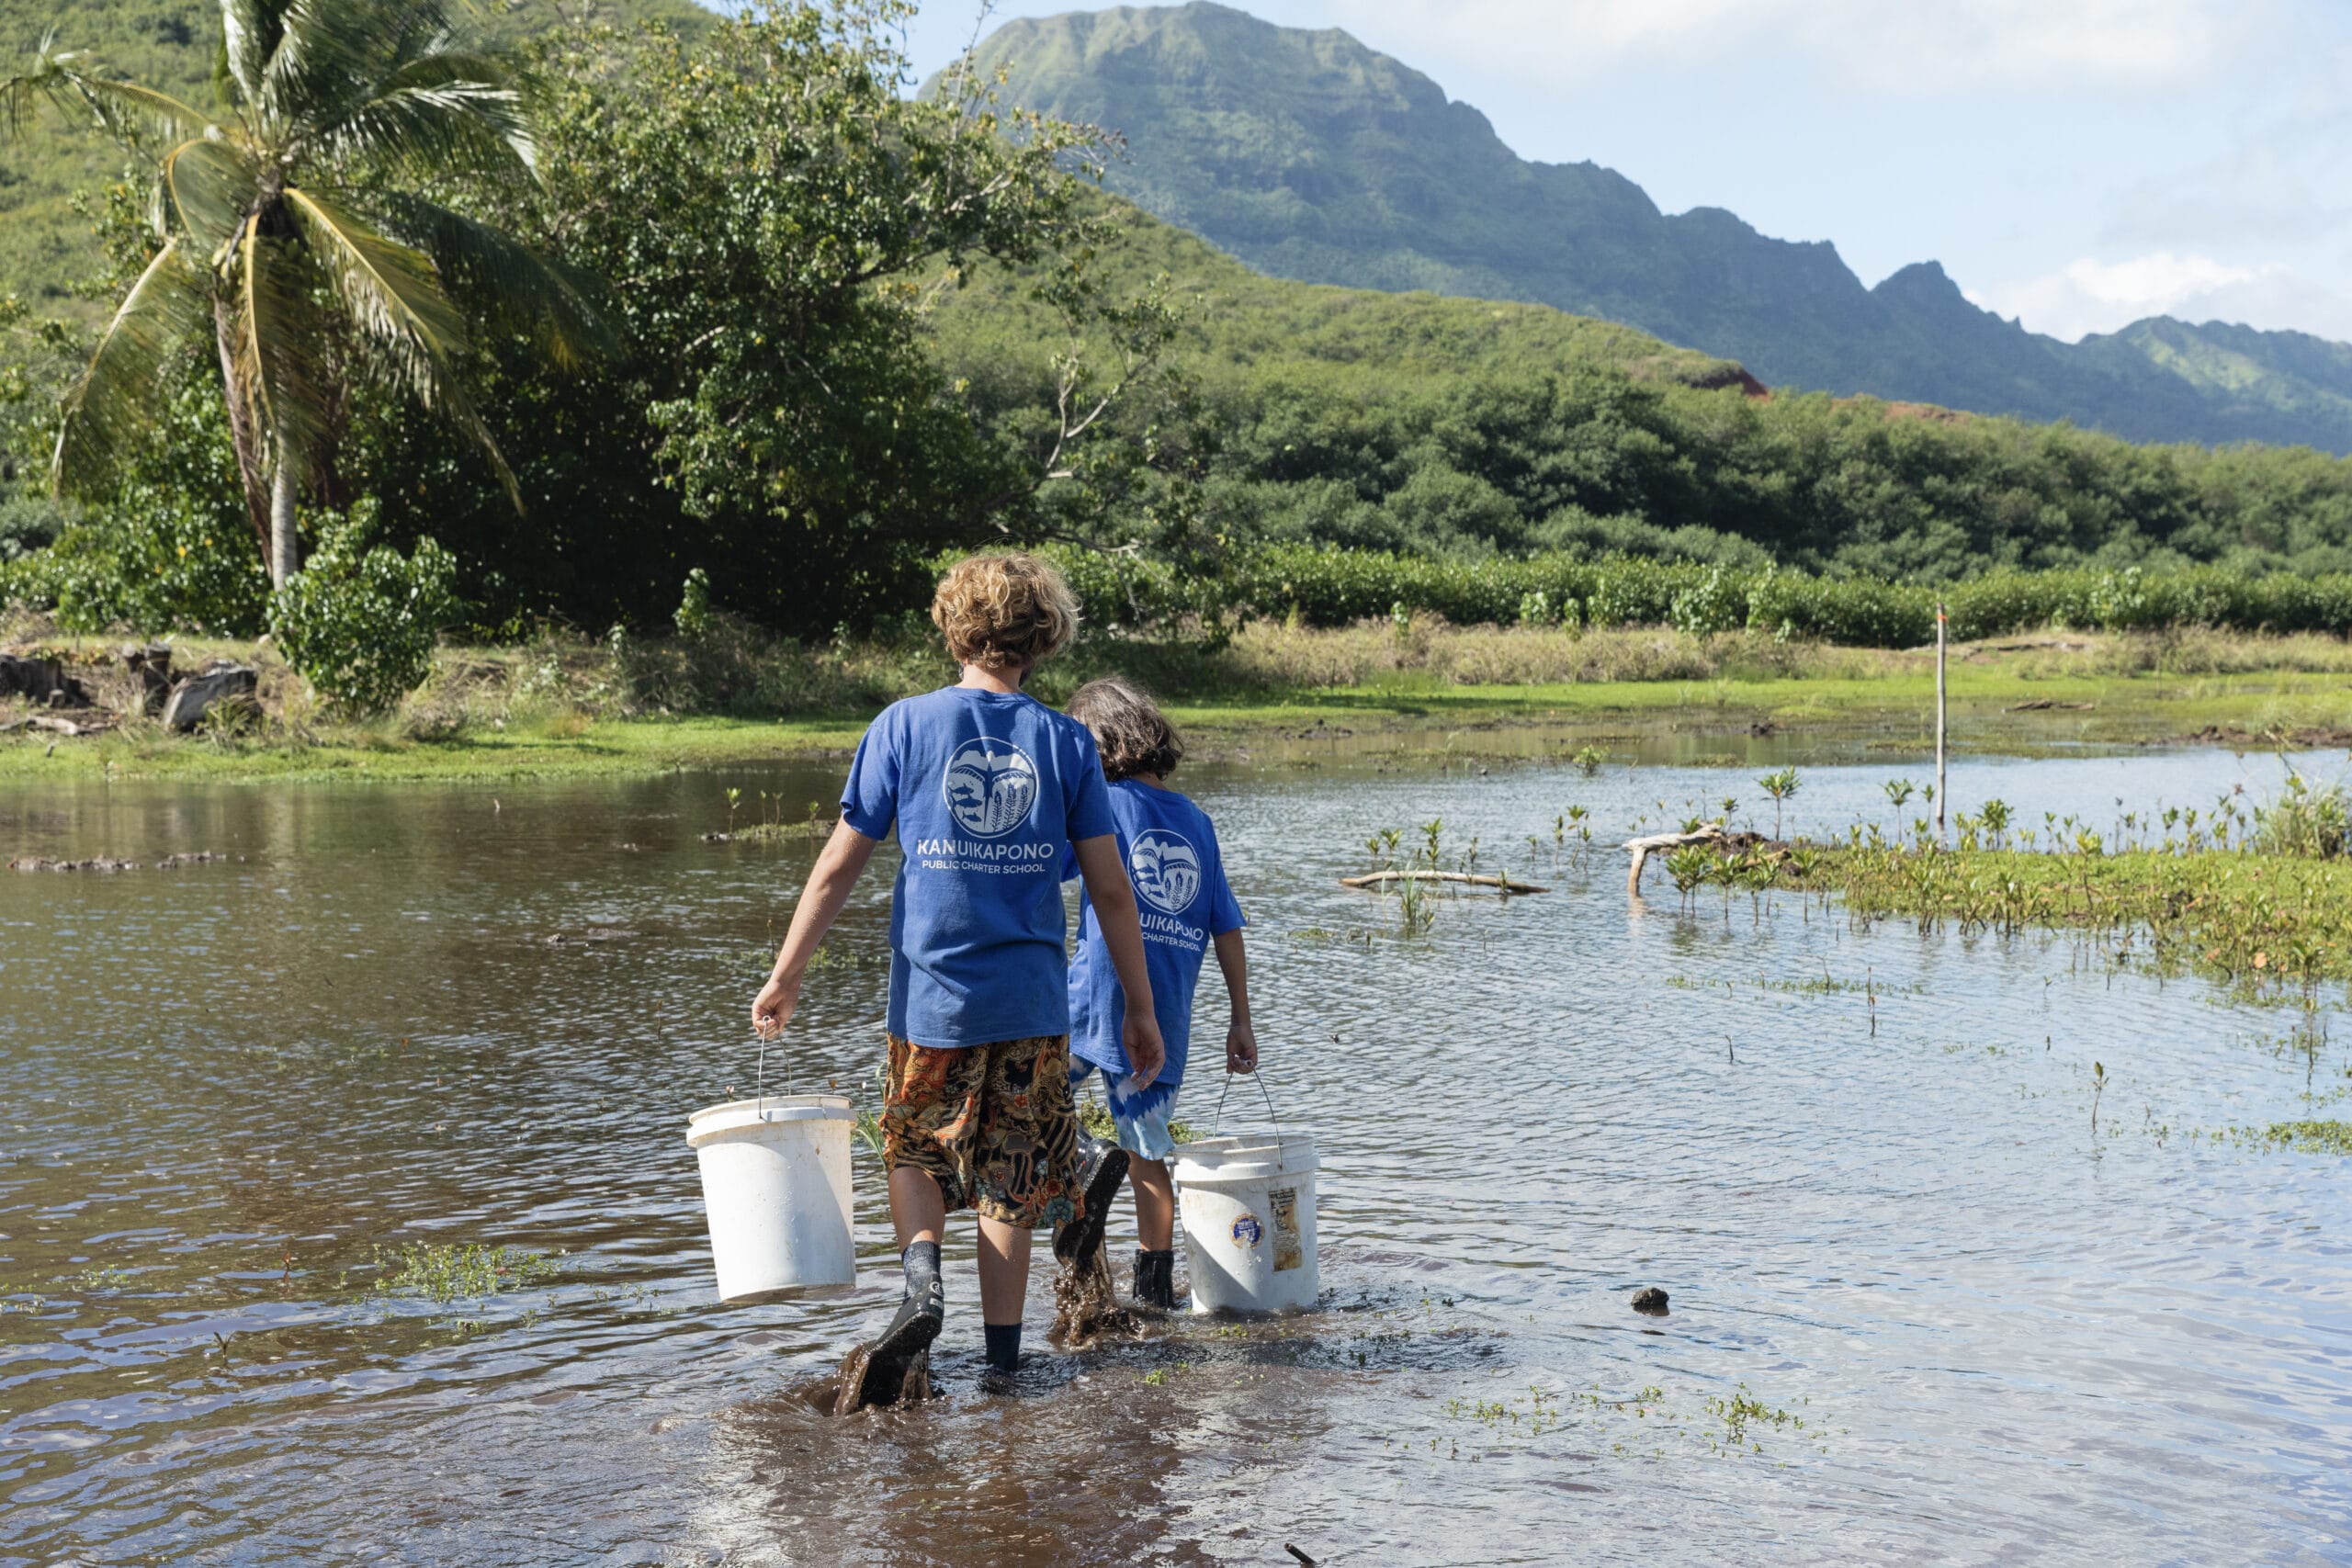 Two boys in blue shirts walking through water with buckets.